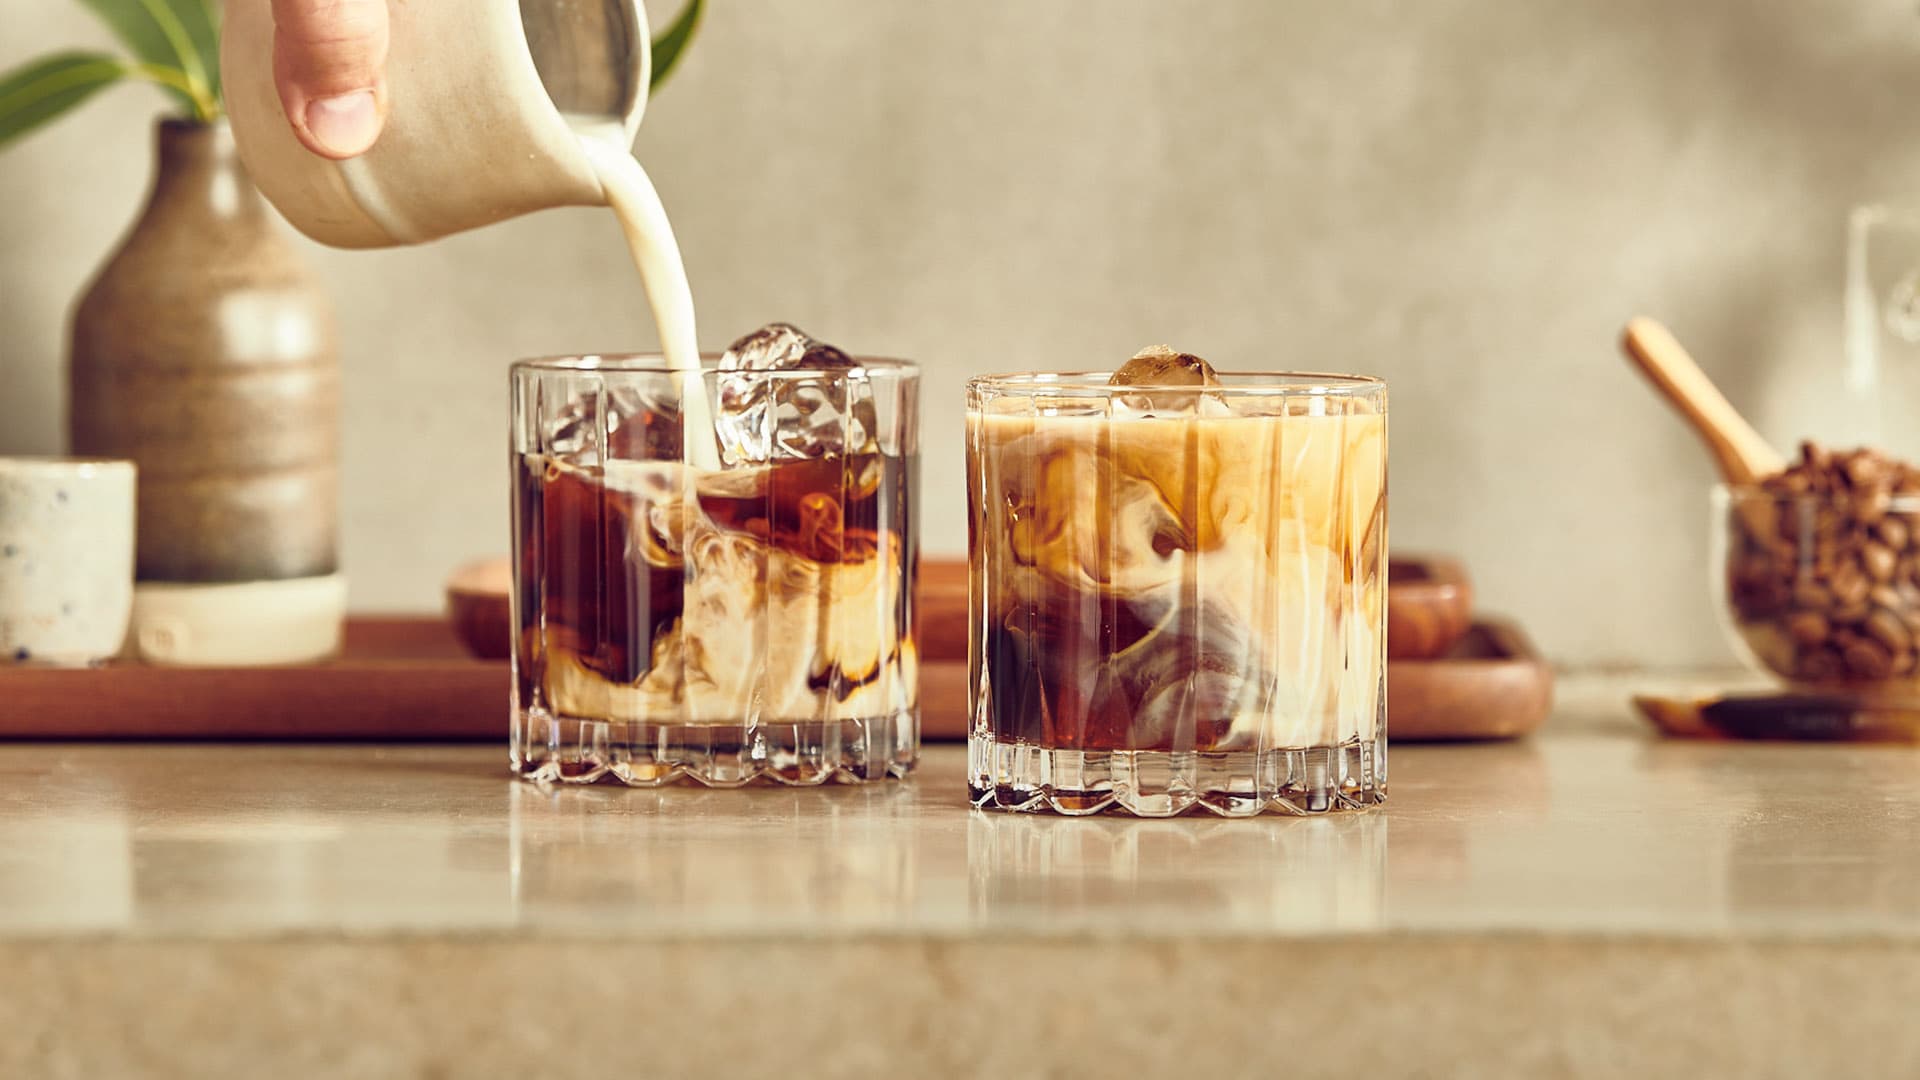 white russian cocktail